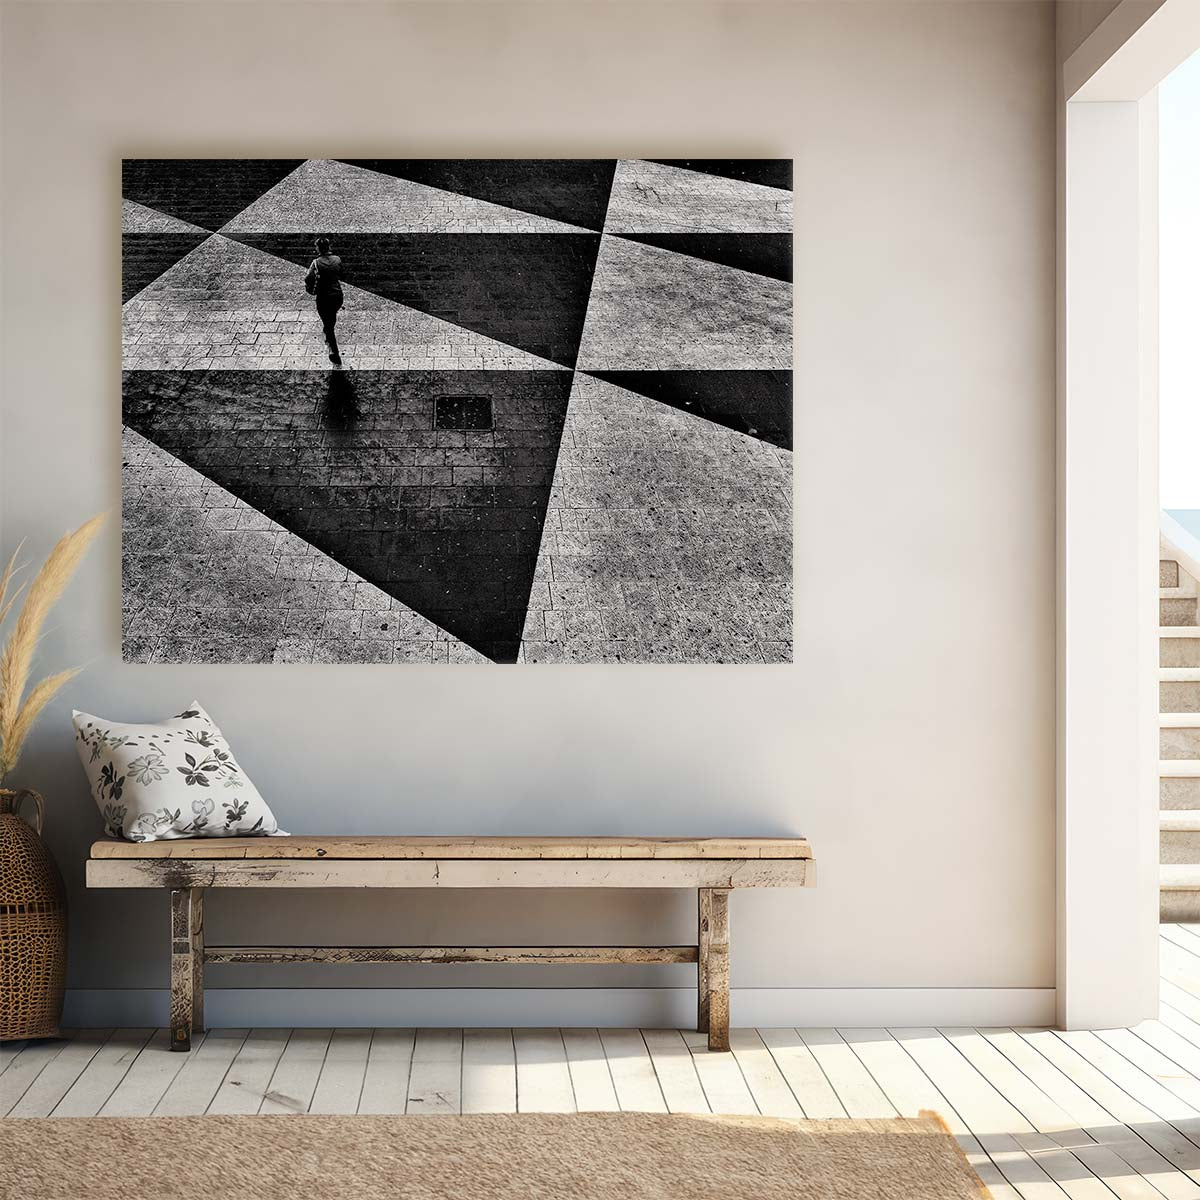 Stockholm Sergelstorg Square Monochrome Street Wall Art by Luxuriance Designs. Made in USA.